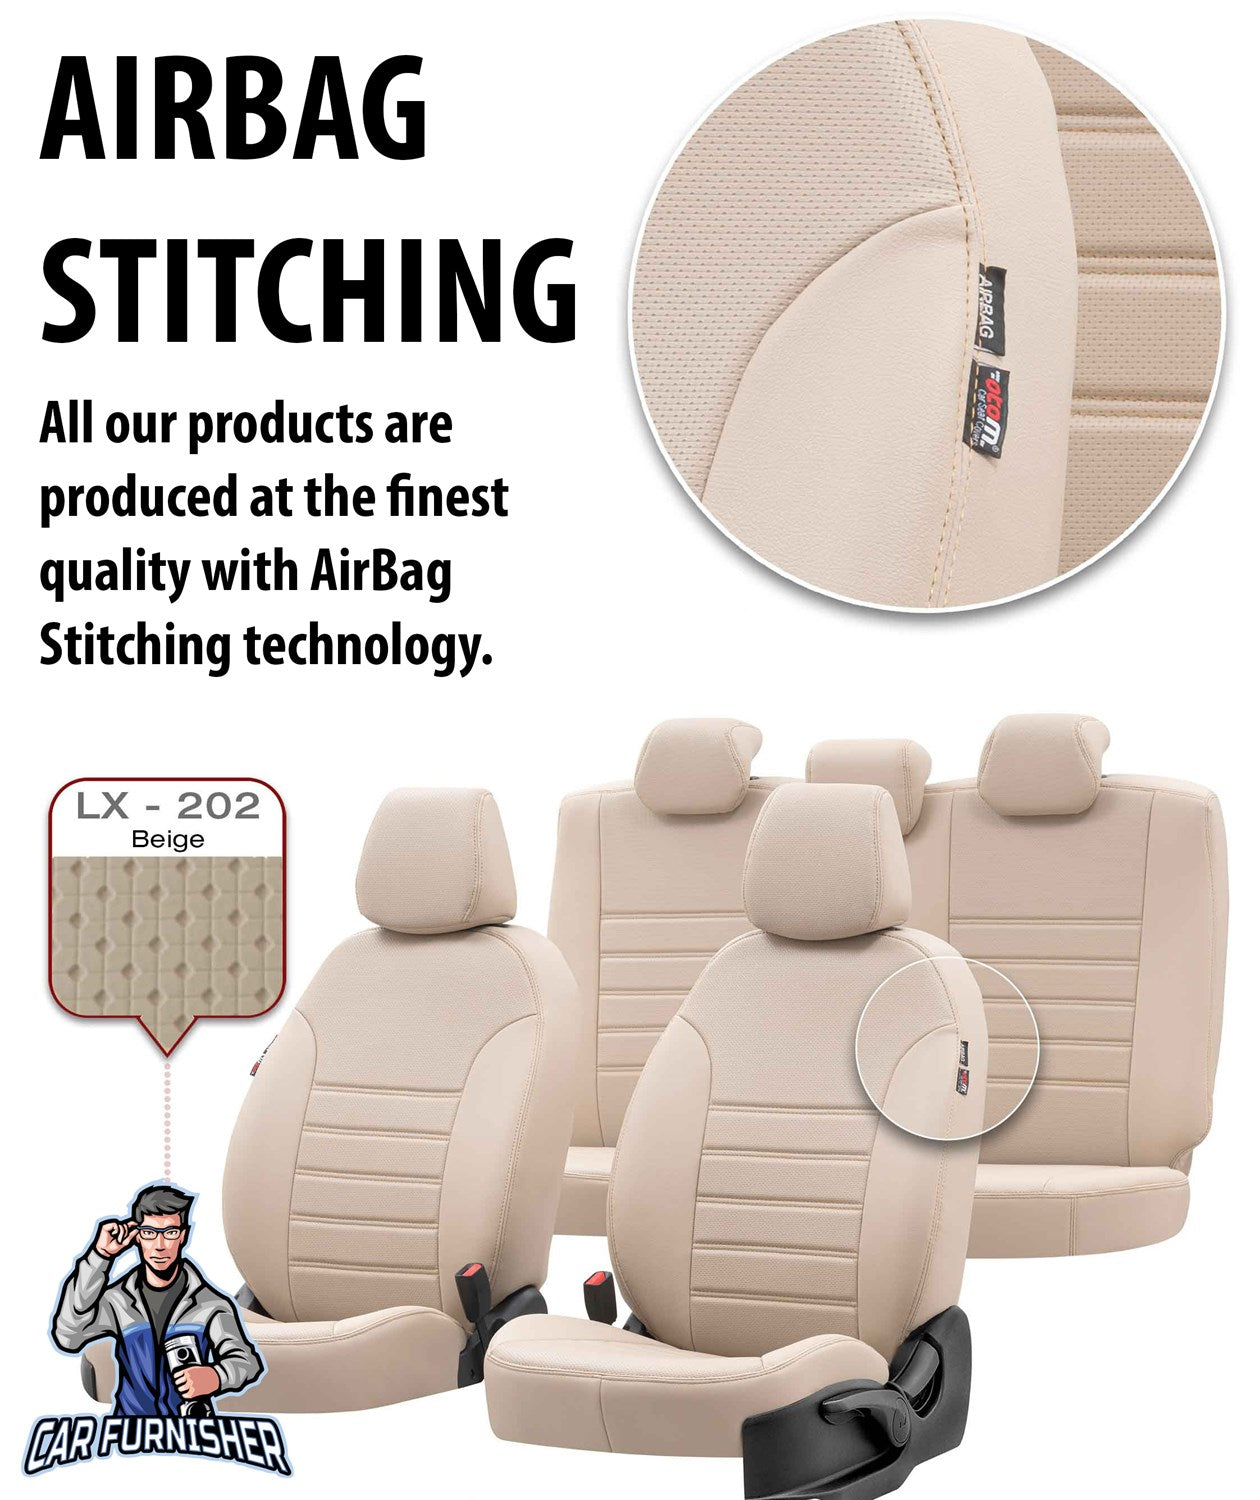 Proton Gen-2 Seat Covers New York Leather Design Beige Leather